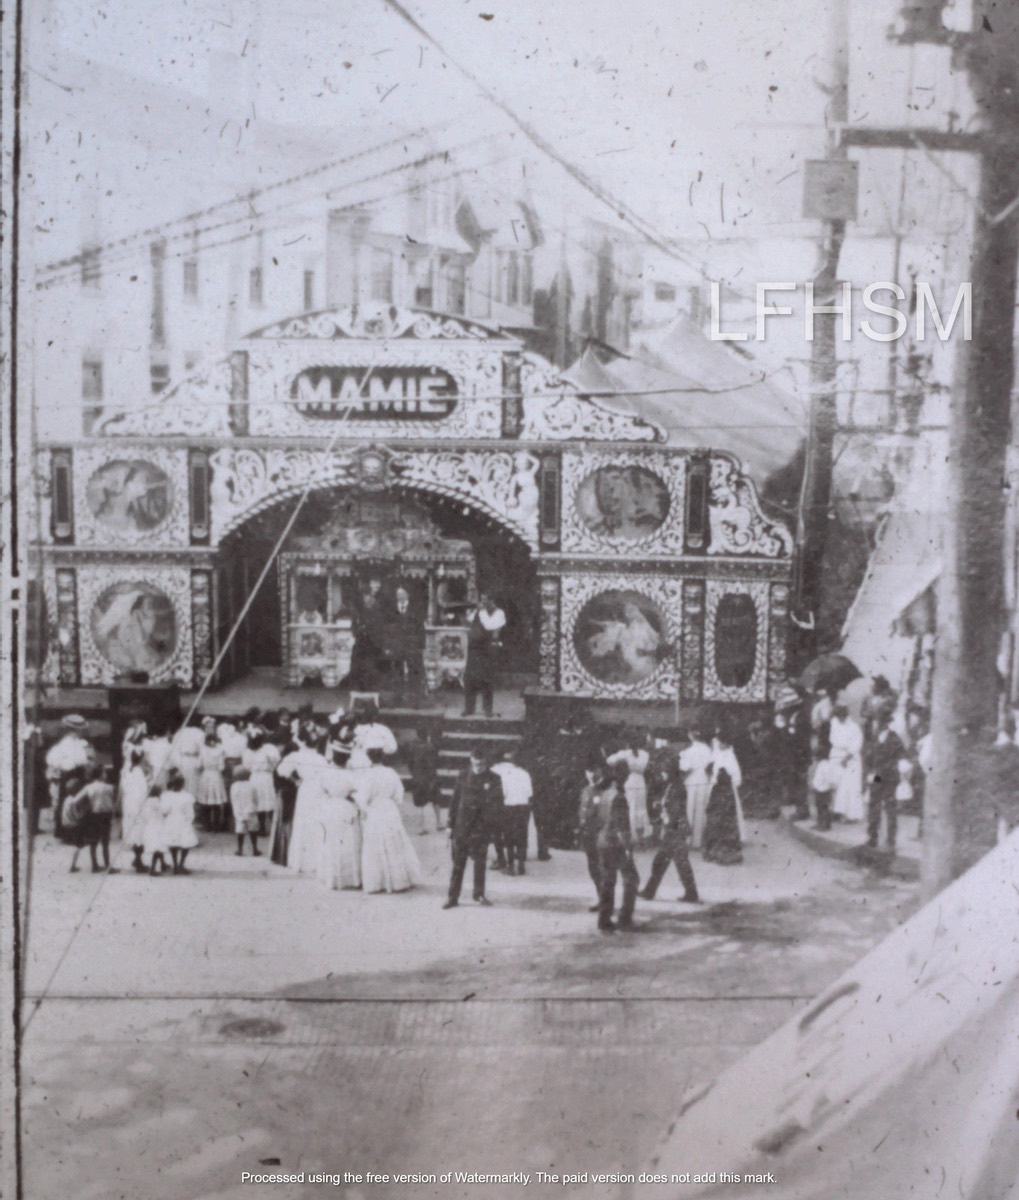 In 1897, silent movie shows came to Little Falls, with the first “movie” being shown in a tent on Second Street, during the annual street fair. | Photo c.1900